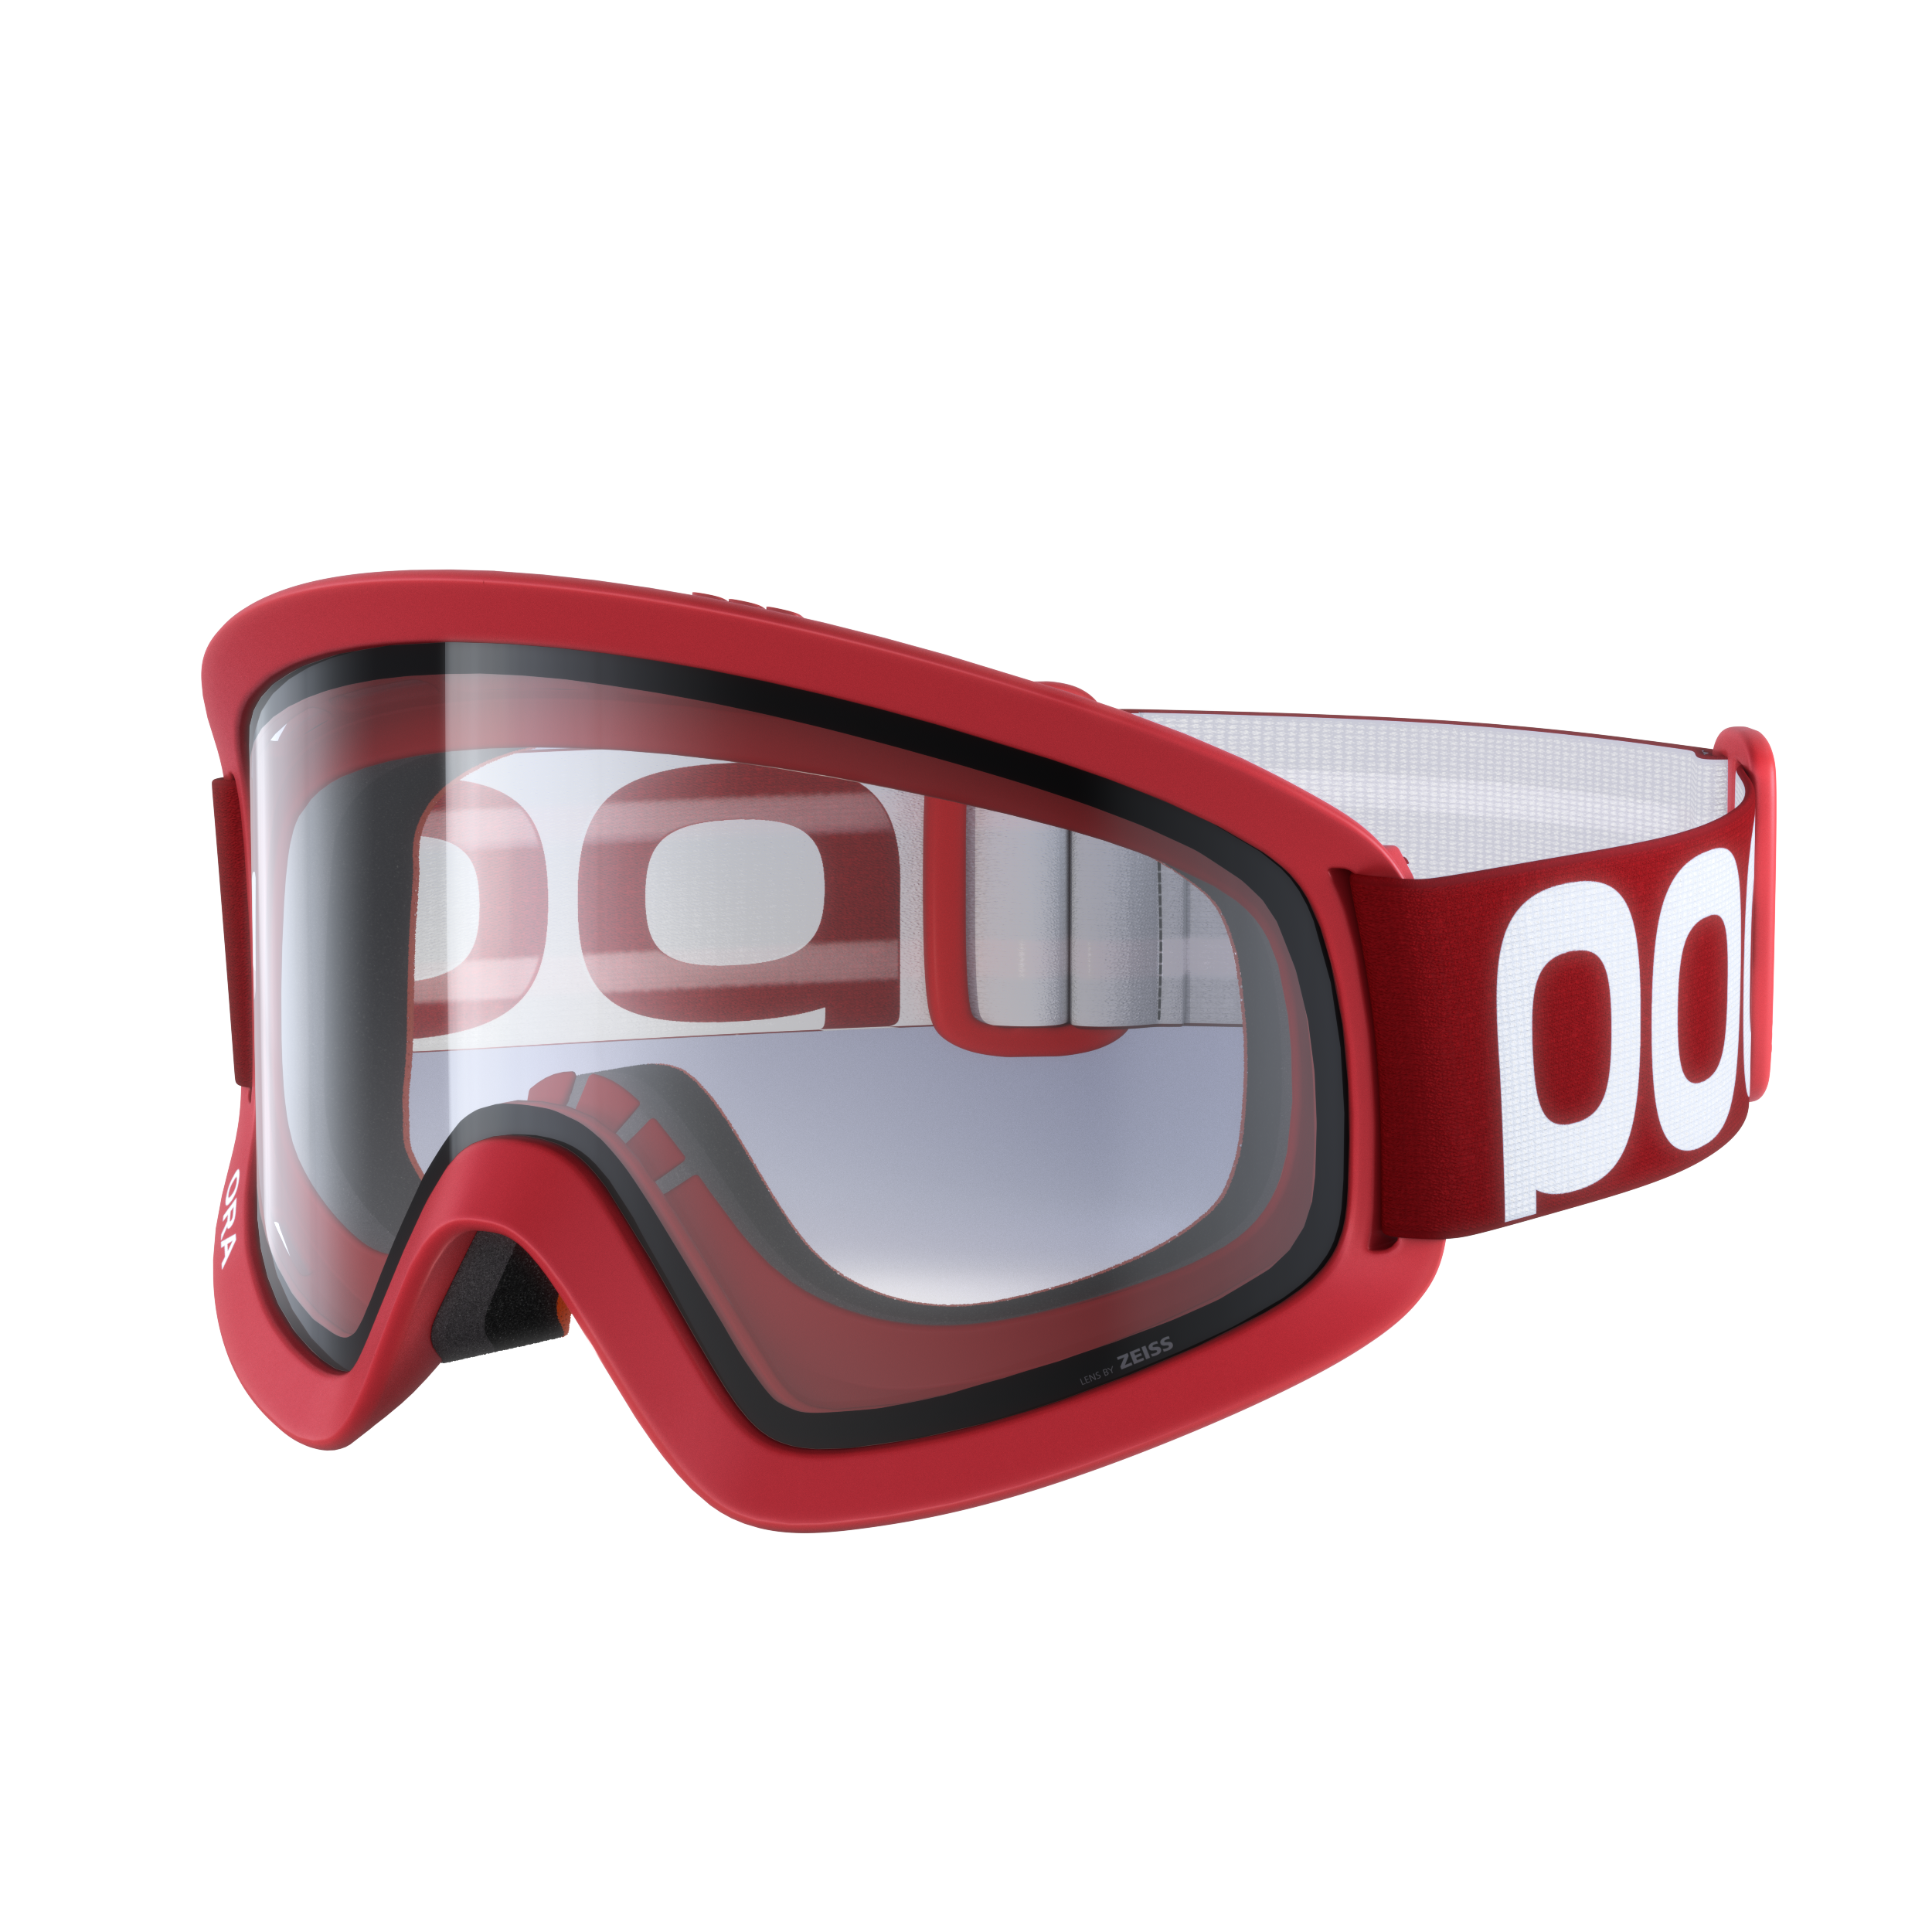 POC Ora Downhill MTB Goggles - Mountain Kids Outfitters: Prismane Red